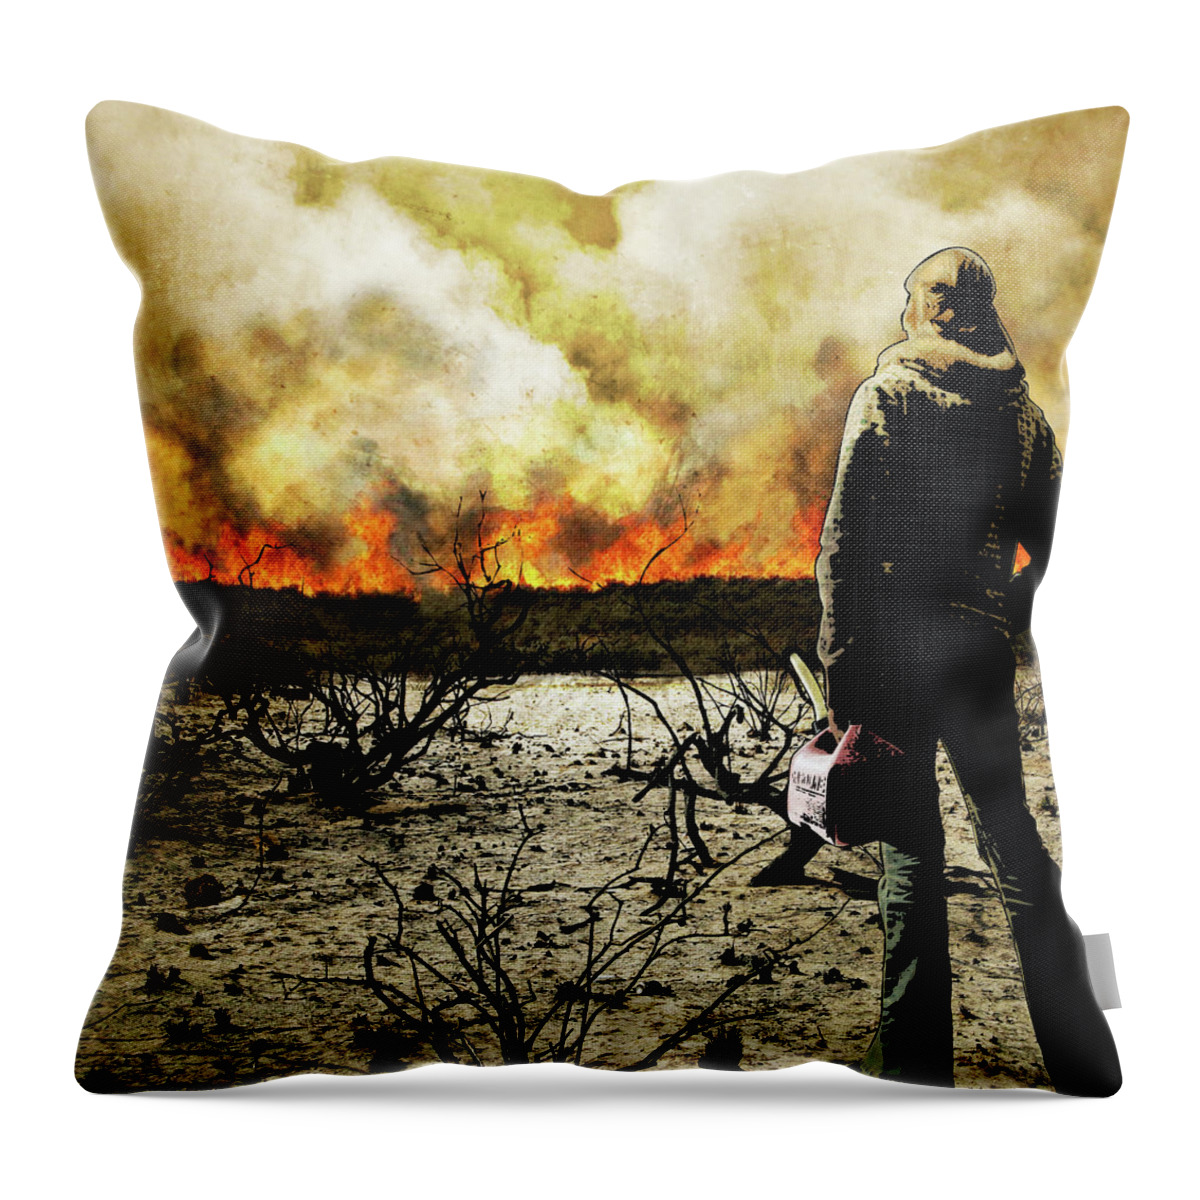 Burning Throw Pillow featuring the digital art Nothing Left To Burn by Jason Casteel